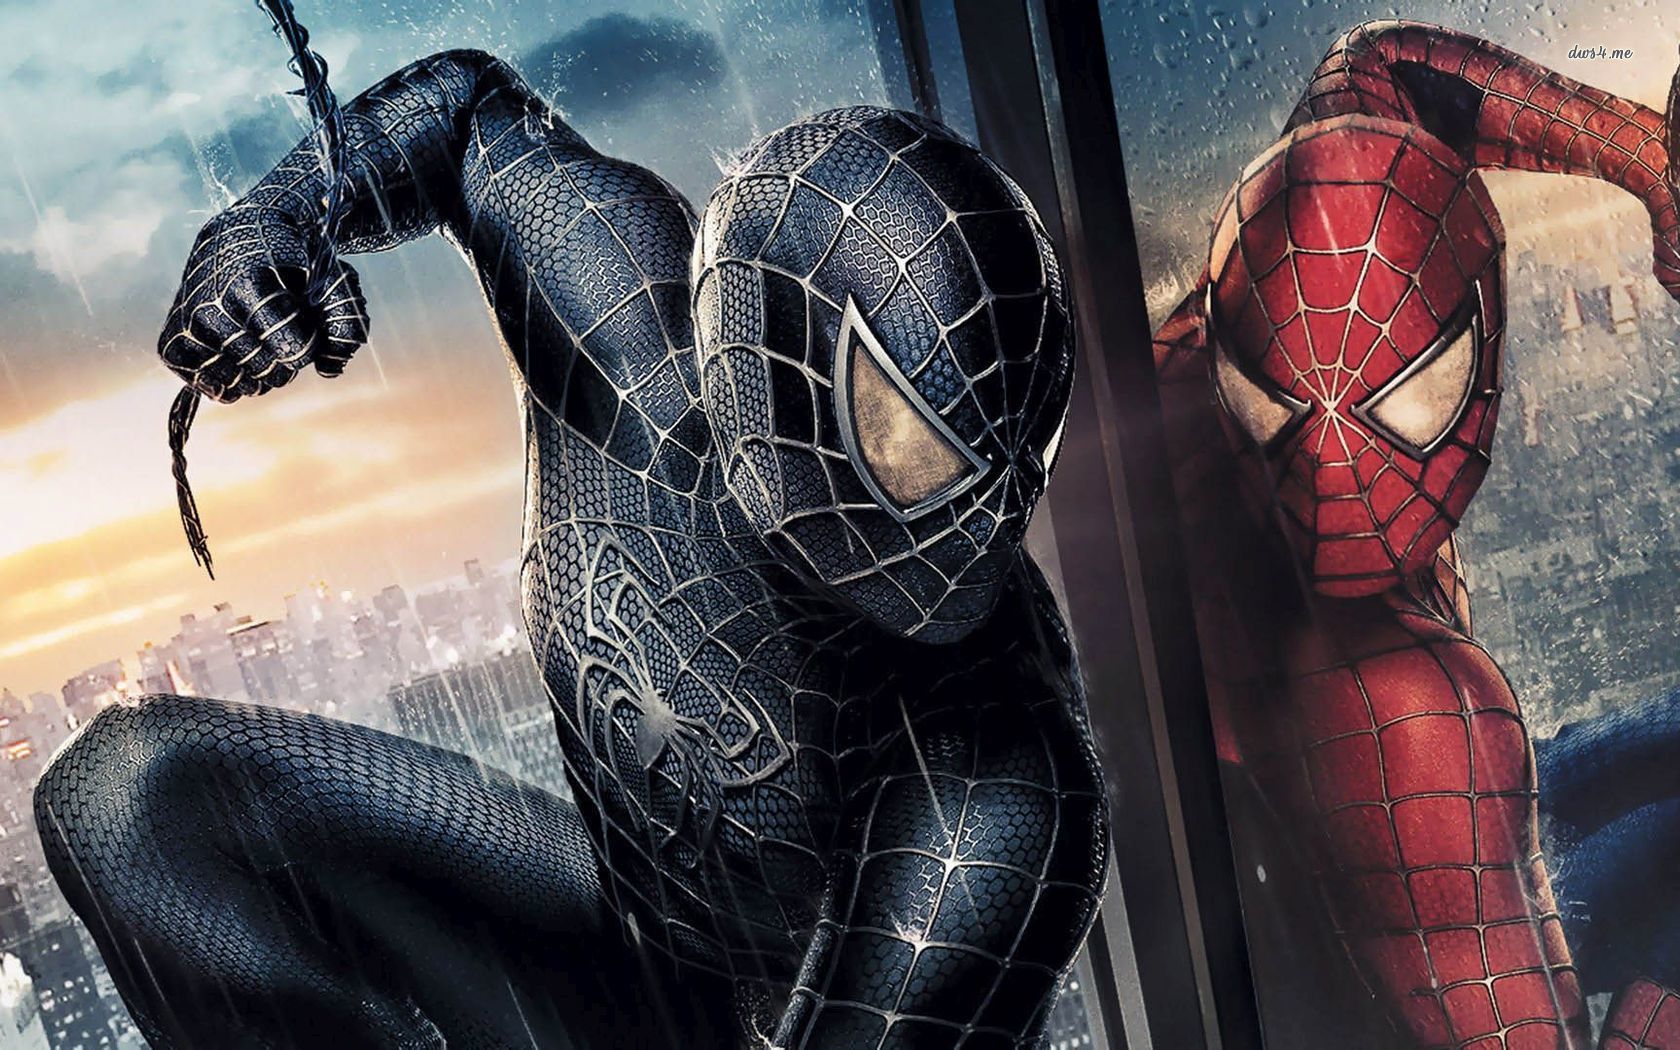 Spider Man on the building - The Amazing Spider Man wallpaper